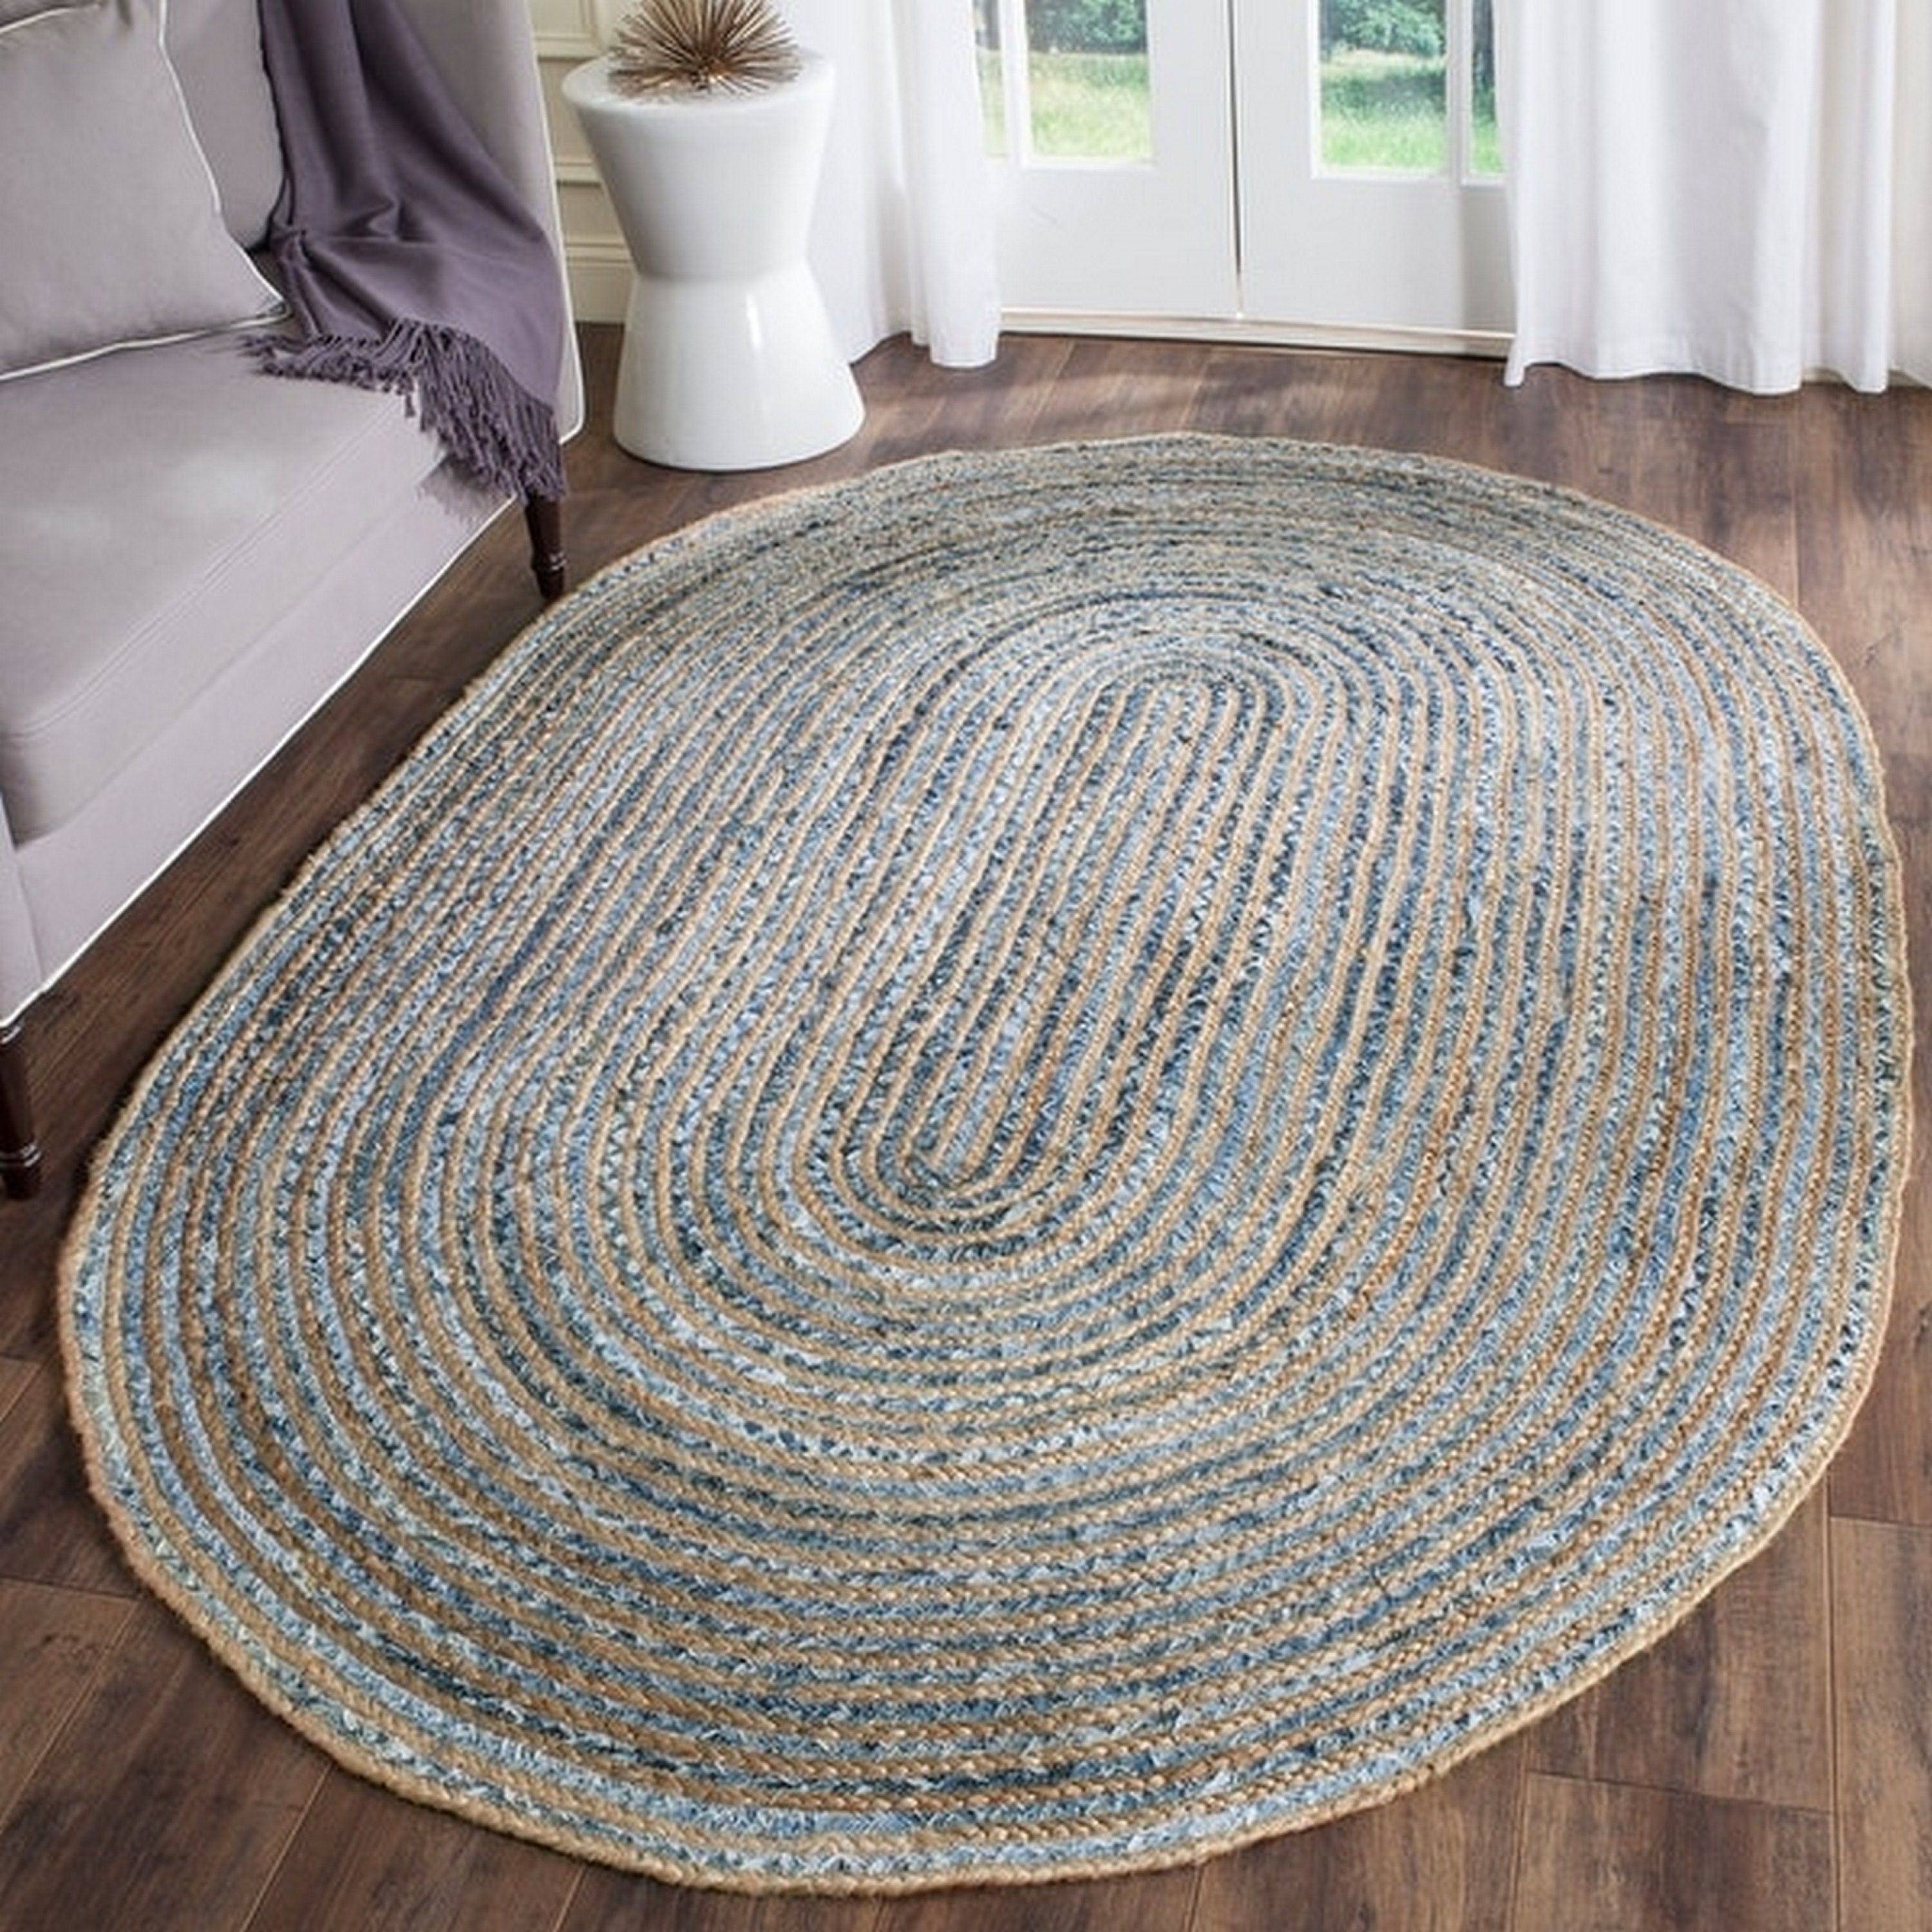 Oval Shag Rug – Etsy Within Shag Oval Rugs (View 12 of 15)